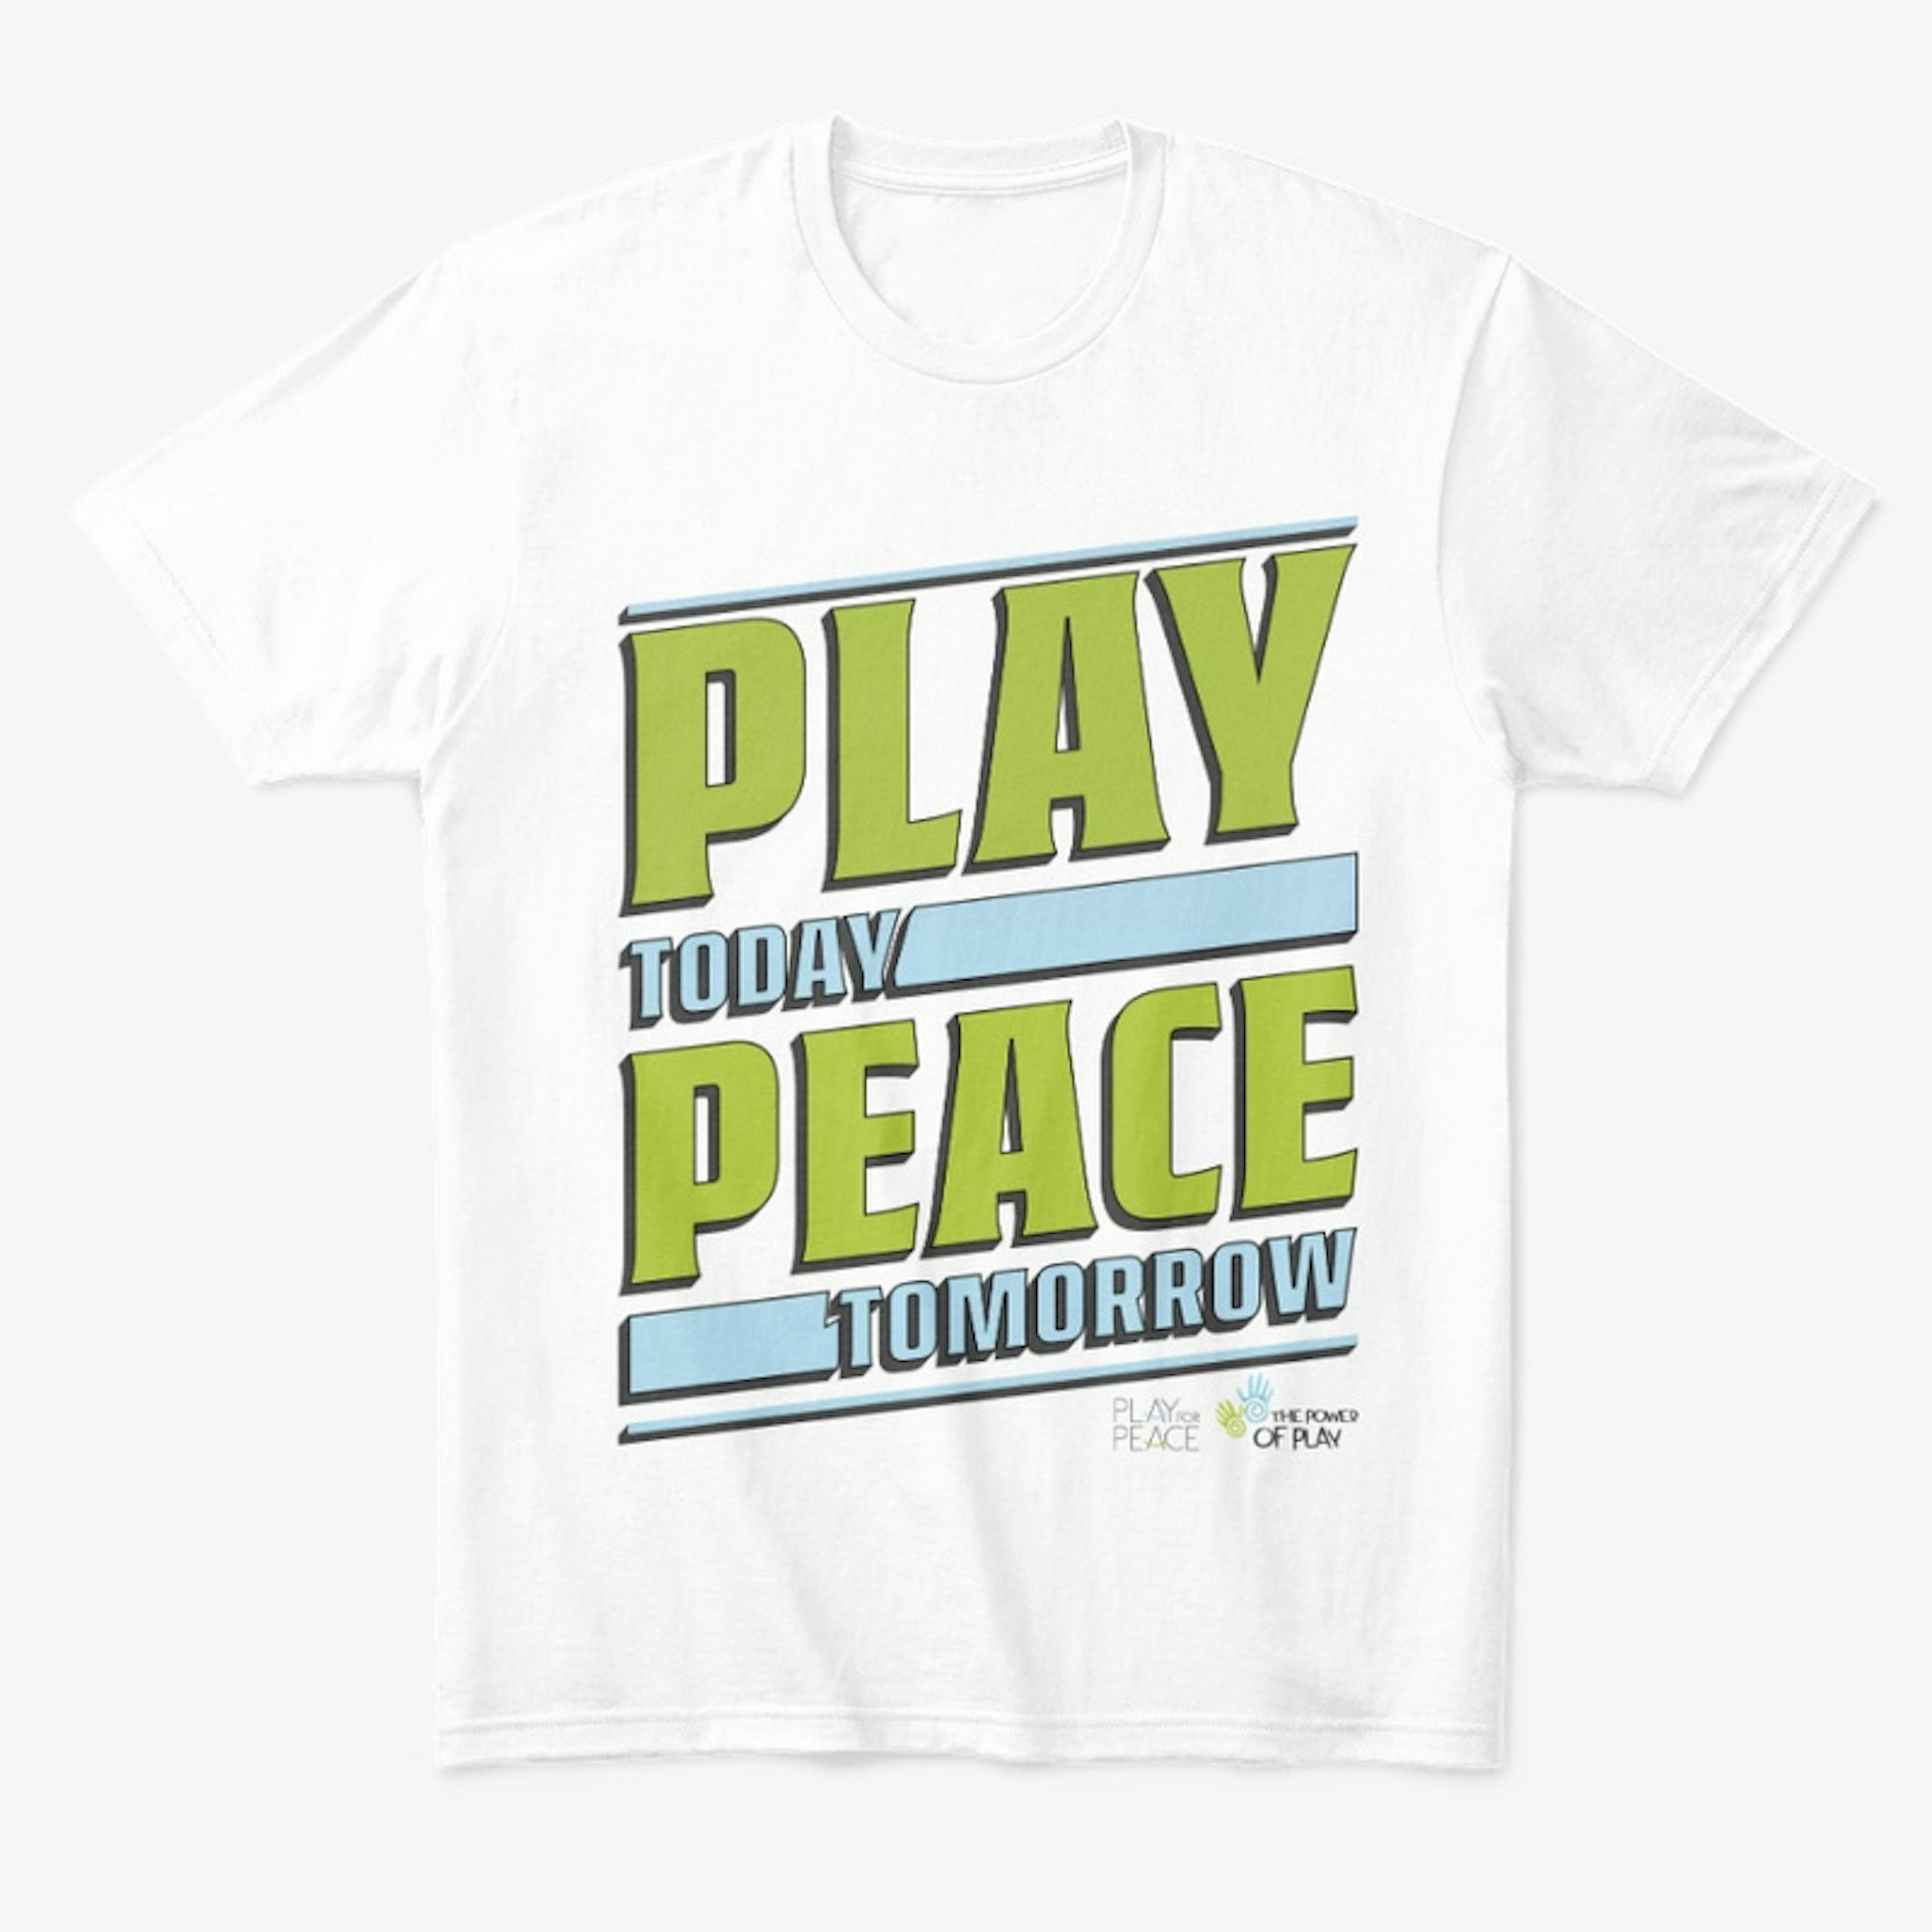 PLAY FOR PEACE